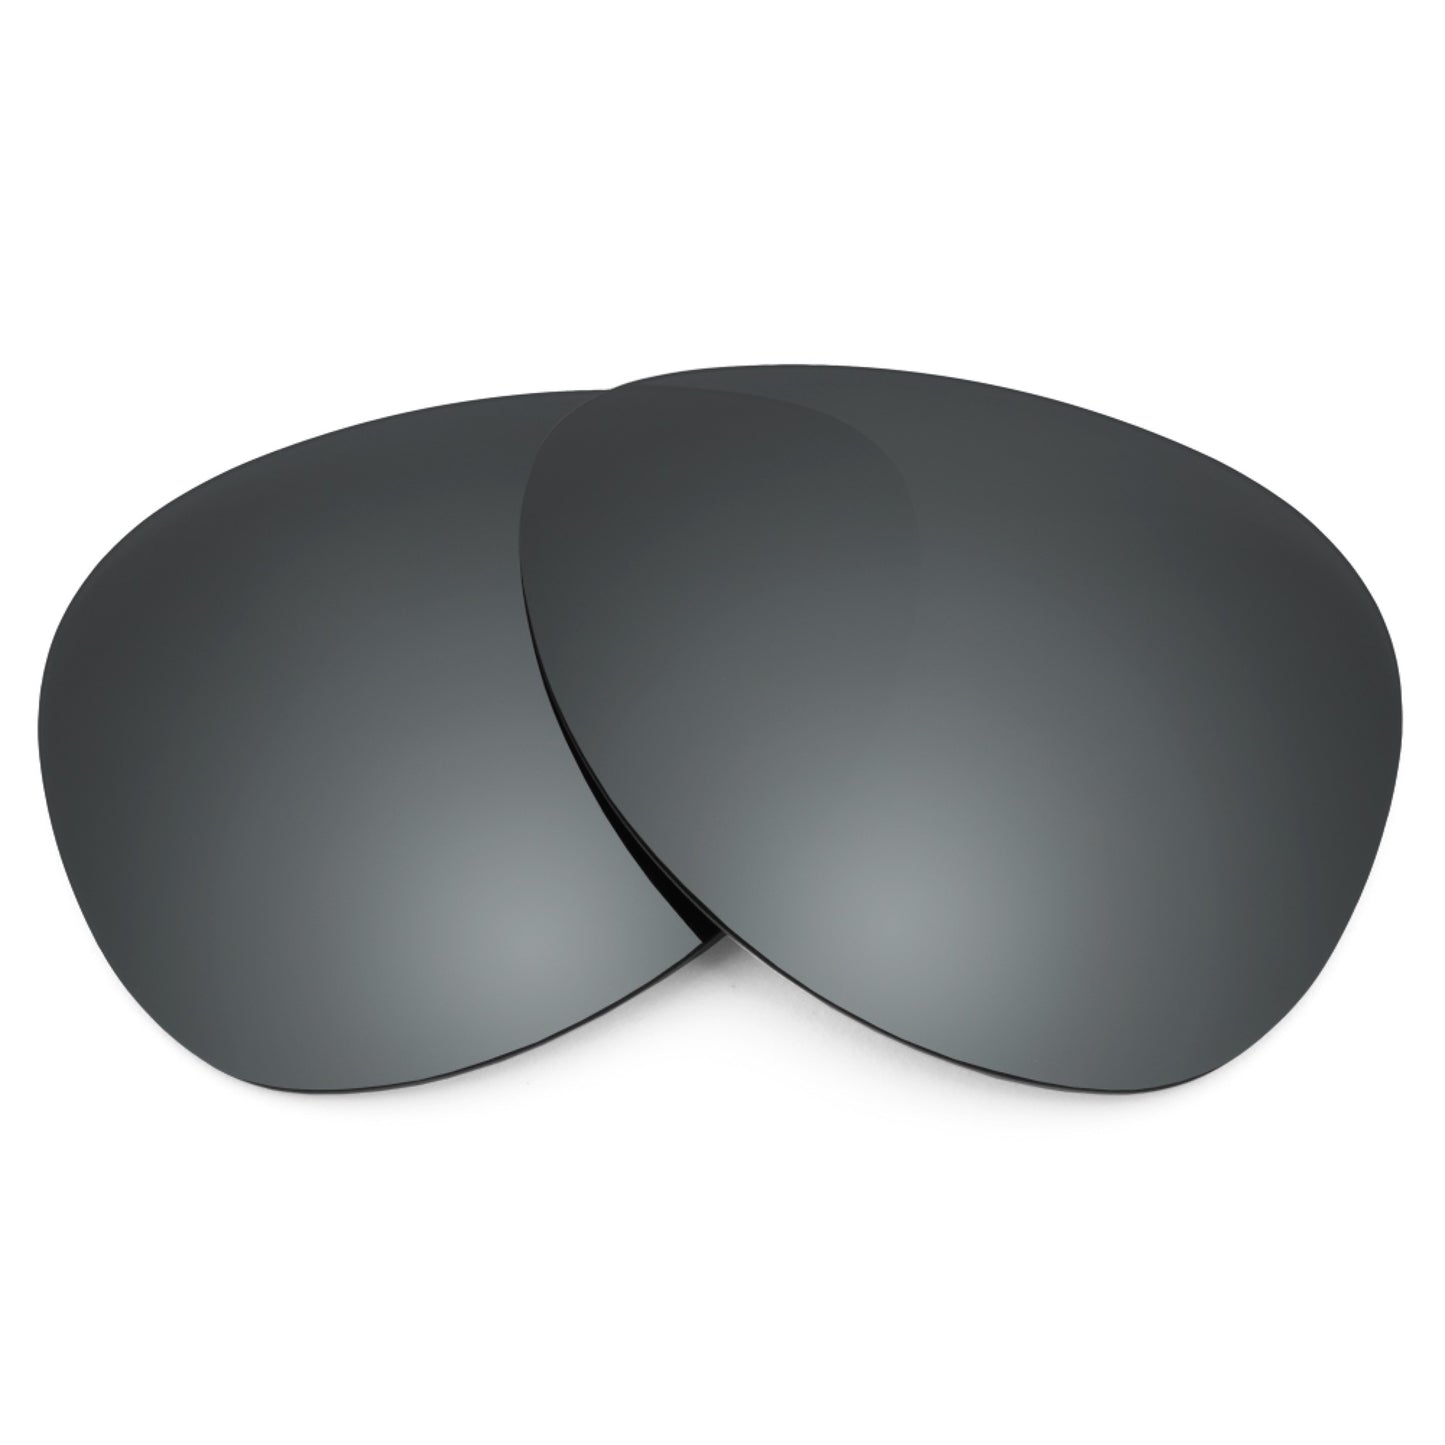 Revant replacement lenses for Ray-Ban Cats 1000 RB4126 57mm Elite Polarized Black Chrome